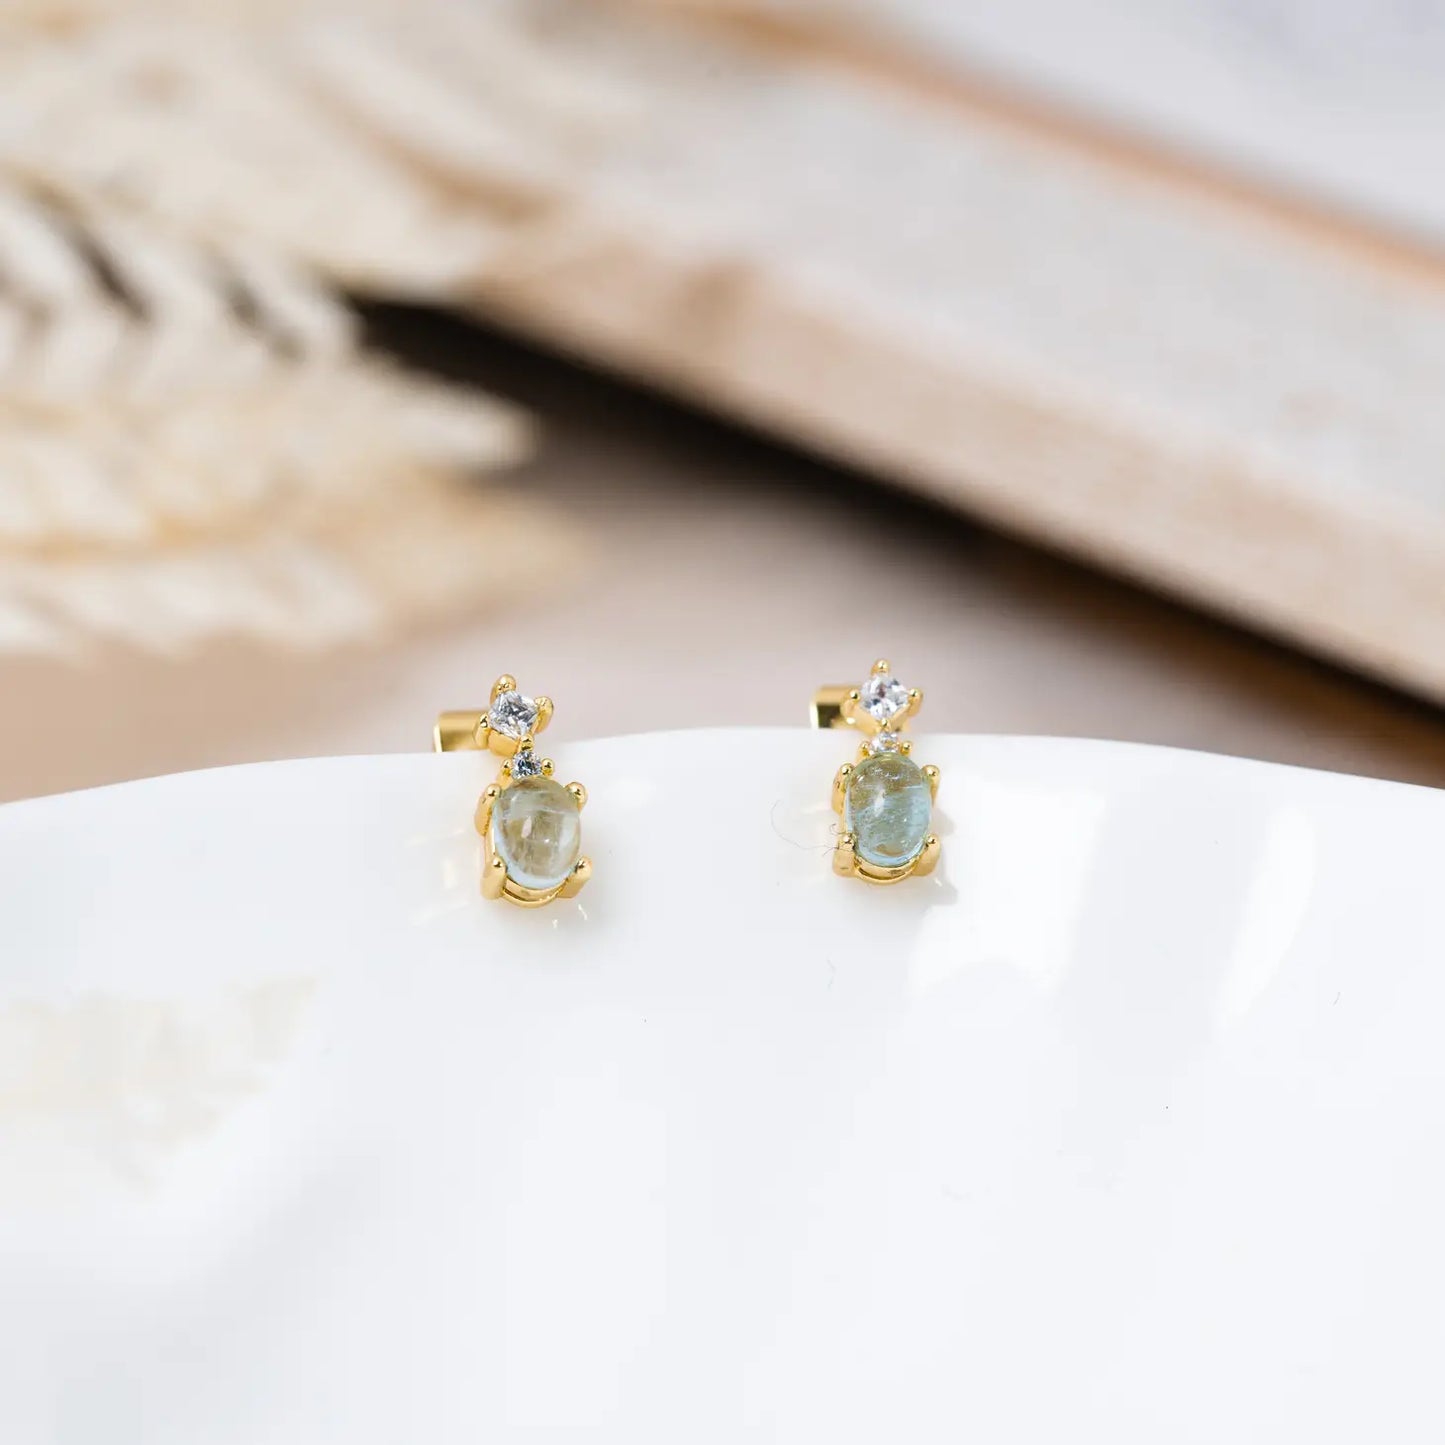 Naomi Earrings  in Aquamarine with CZ Details, Gold Plate and Stainless Steel